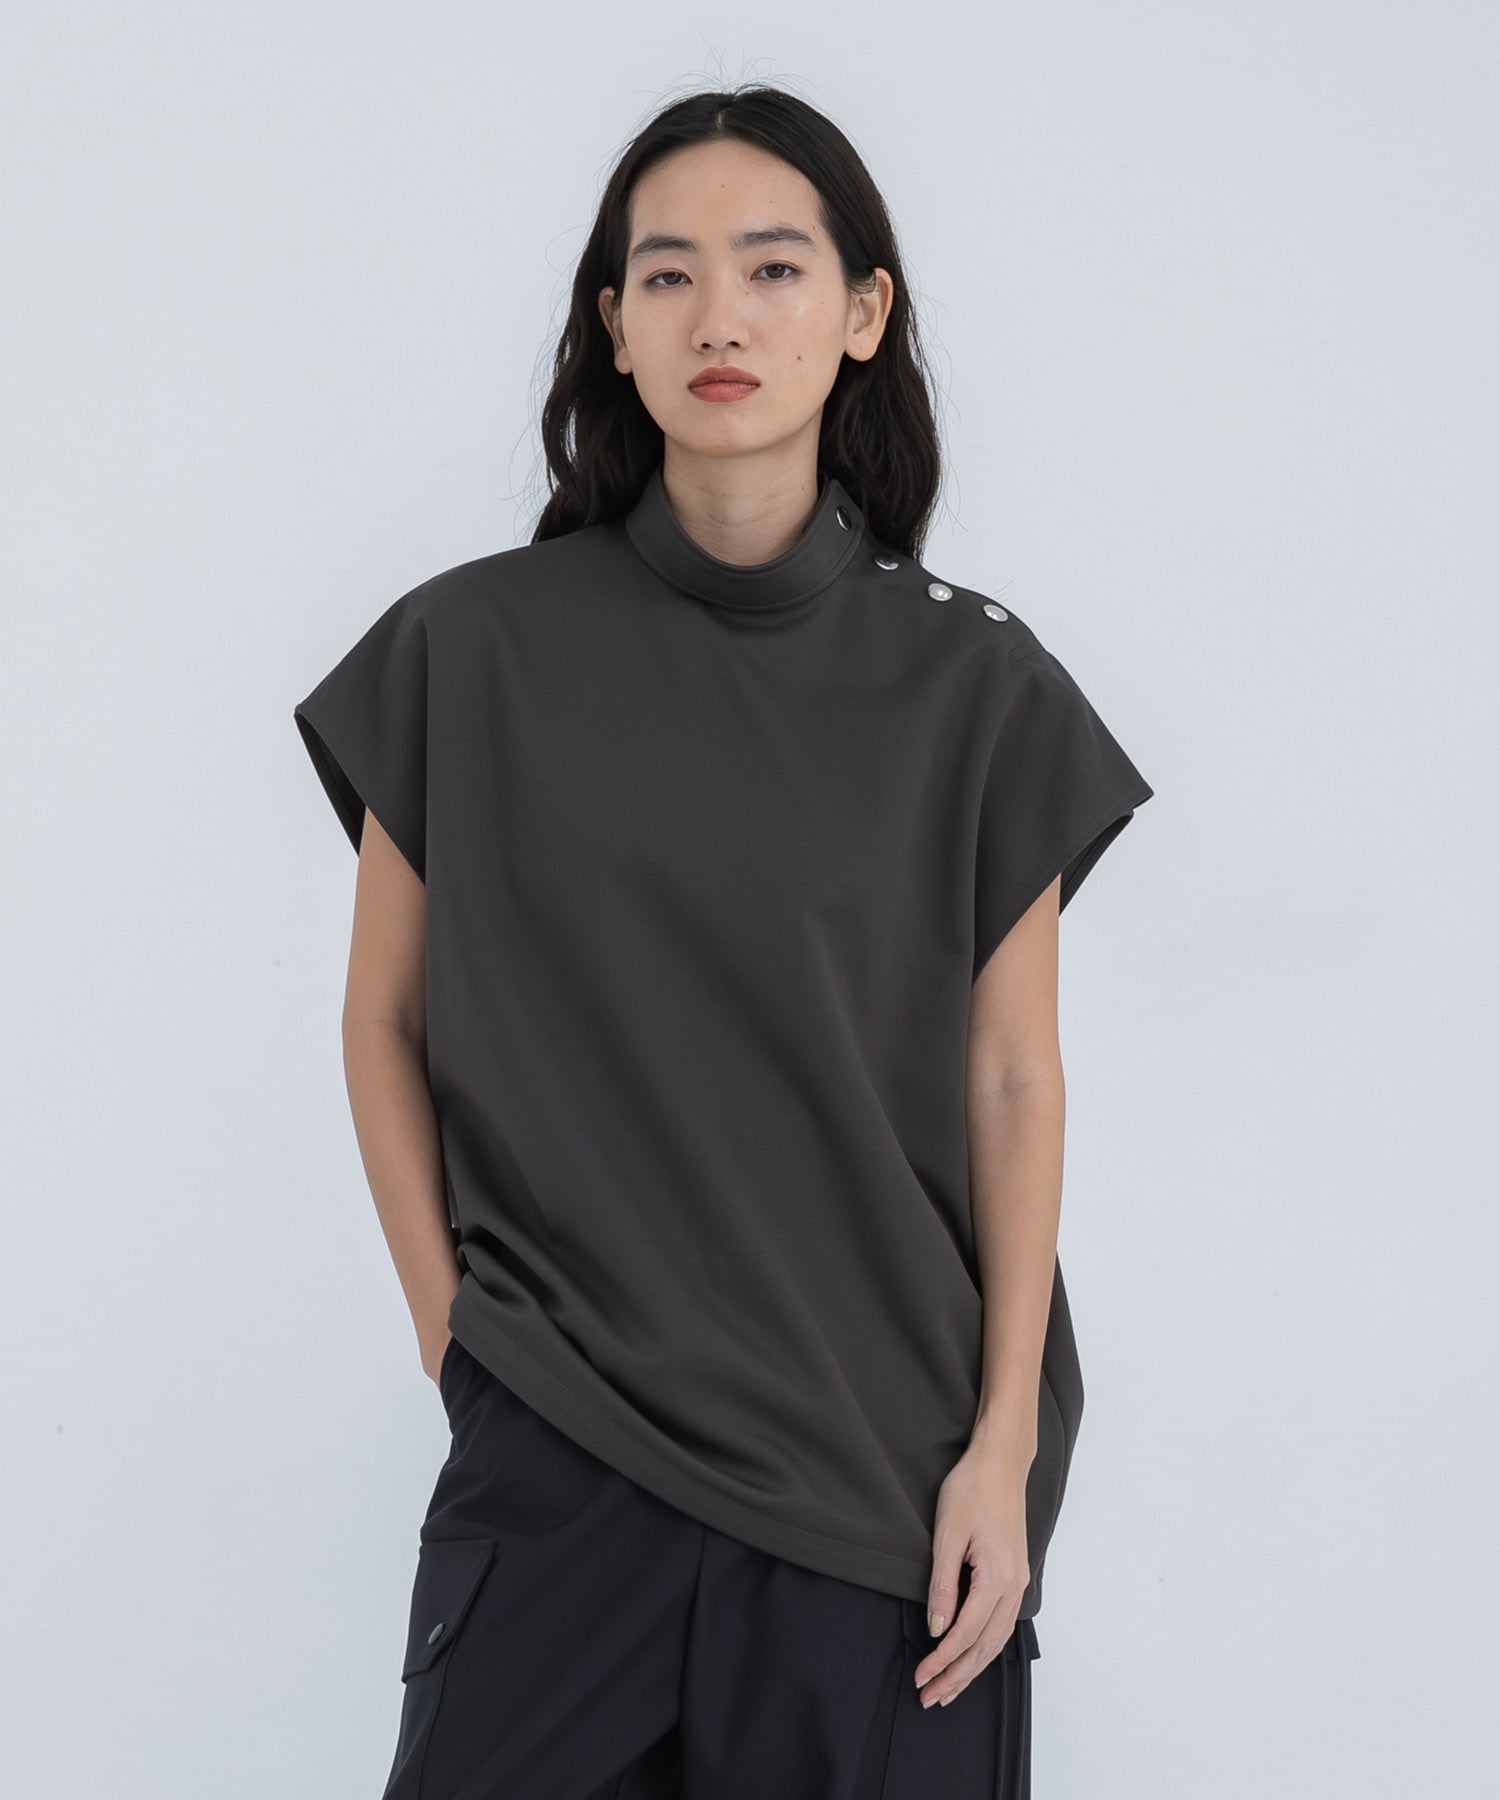 NEW ARRIVAL: WOMENS(並び順：新着順)｜ STUDIOUS ONLINE公式通販サイト